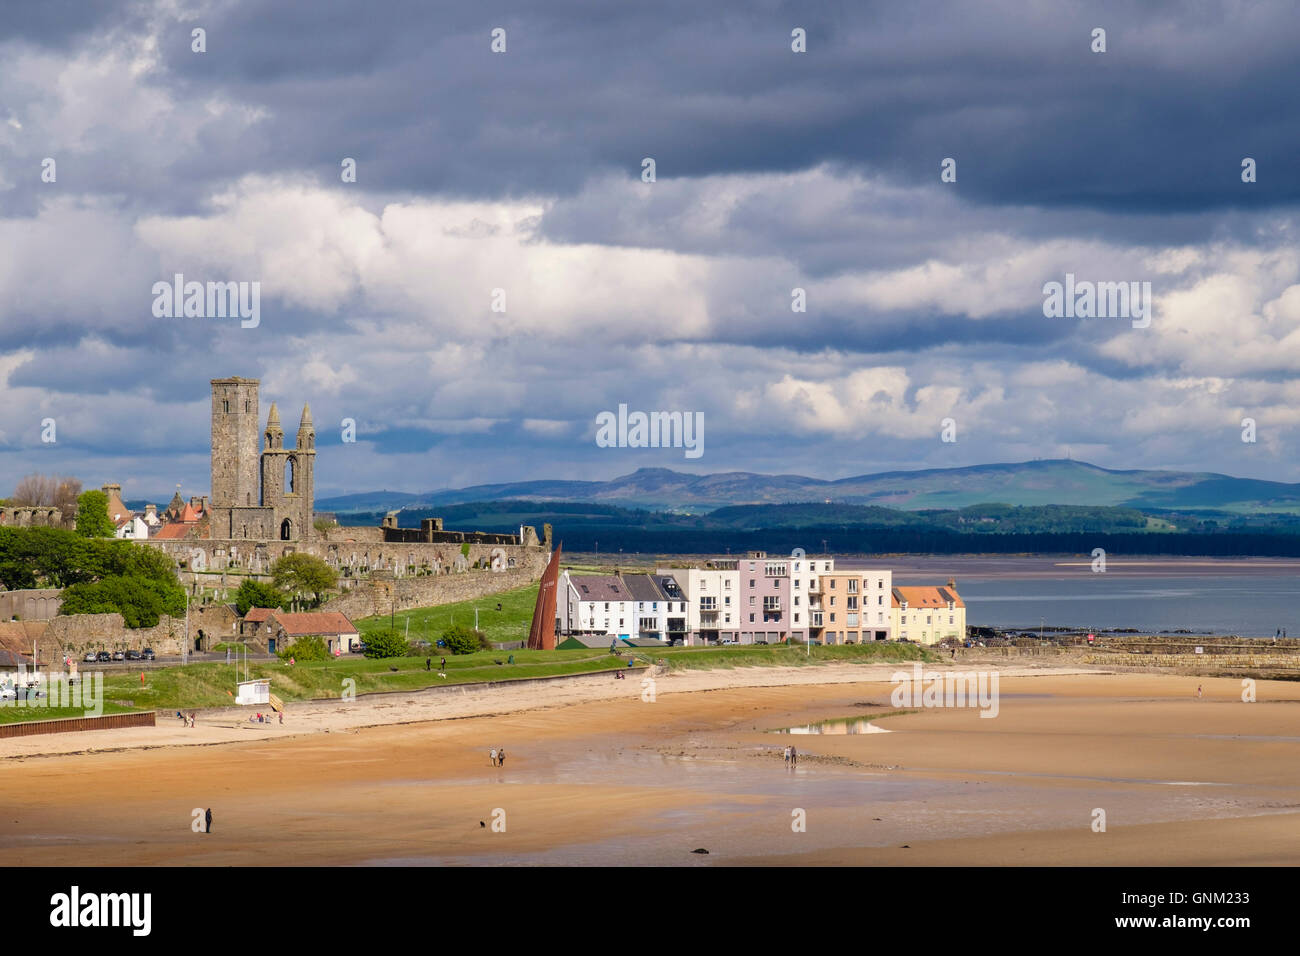 View across sunlit East Sands beach to Cathedral ruins in Scottish town under dramatic dark cloudy sky. St Andrews Fife Scotland UK Britain Stock Photo